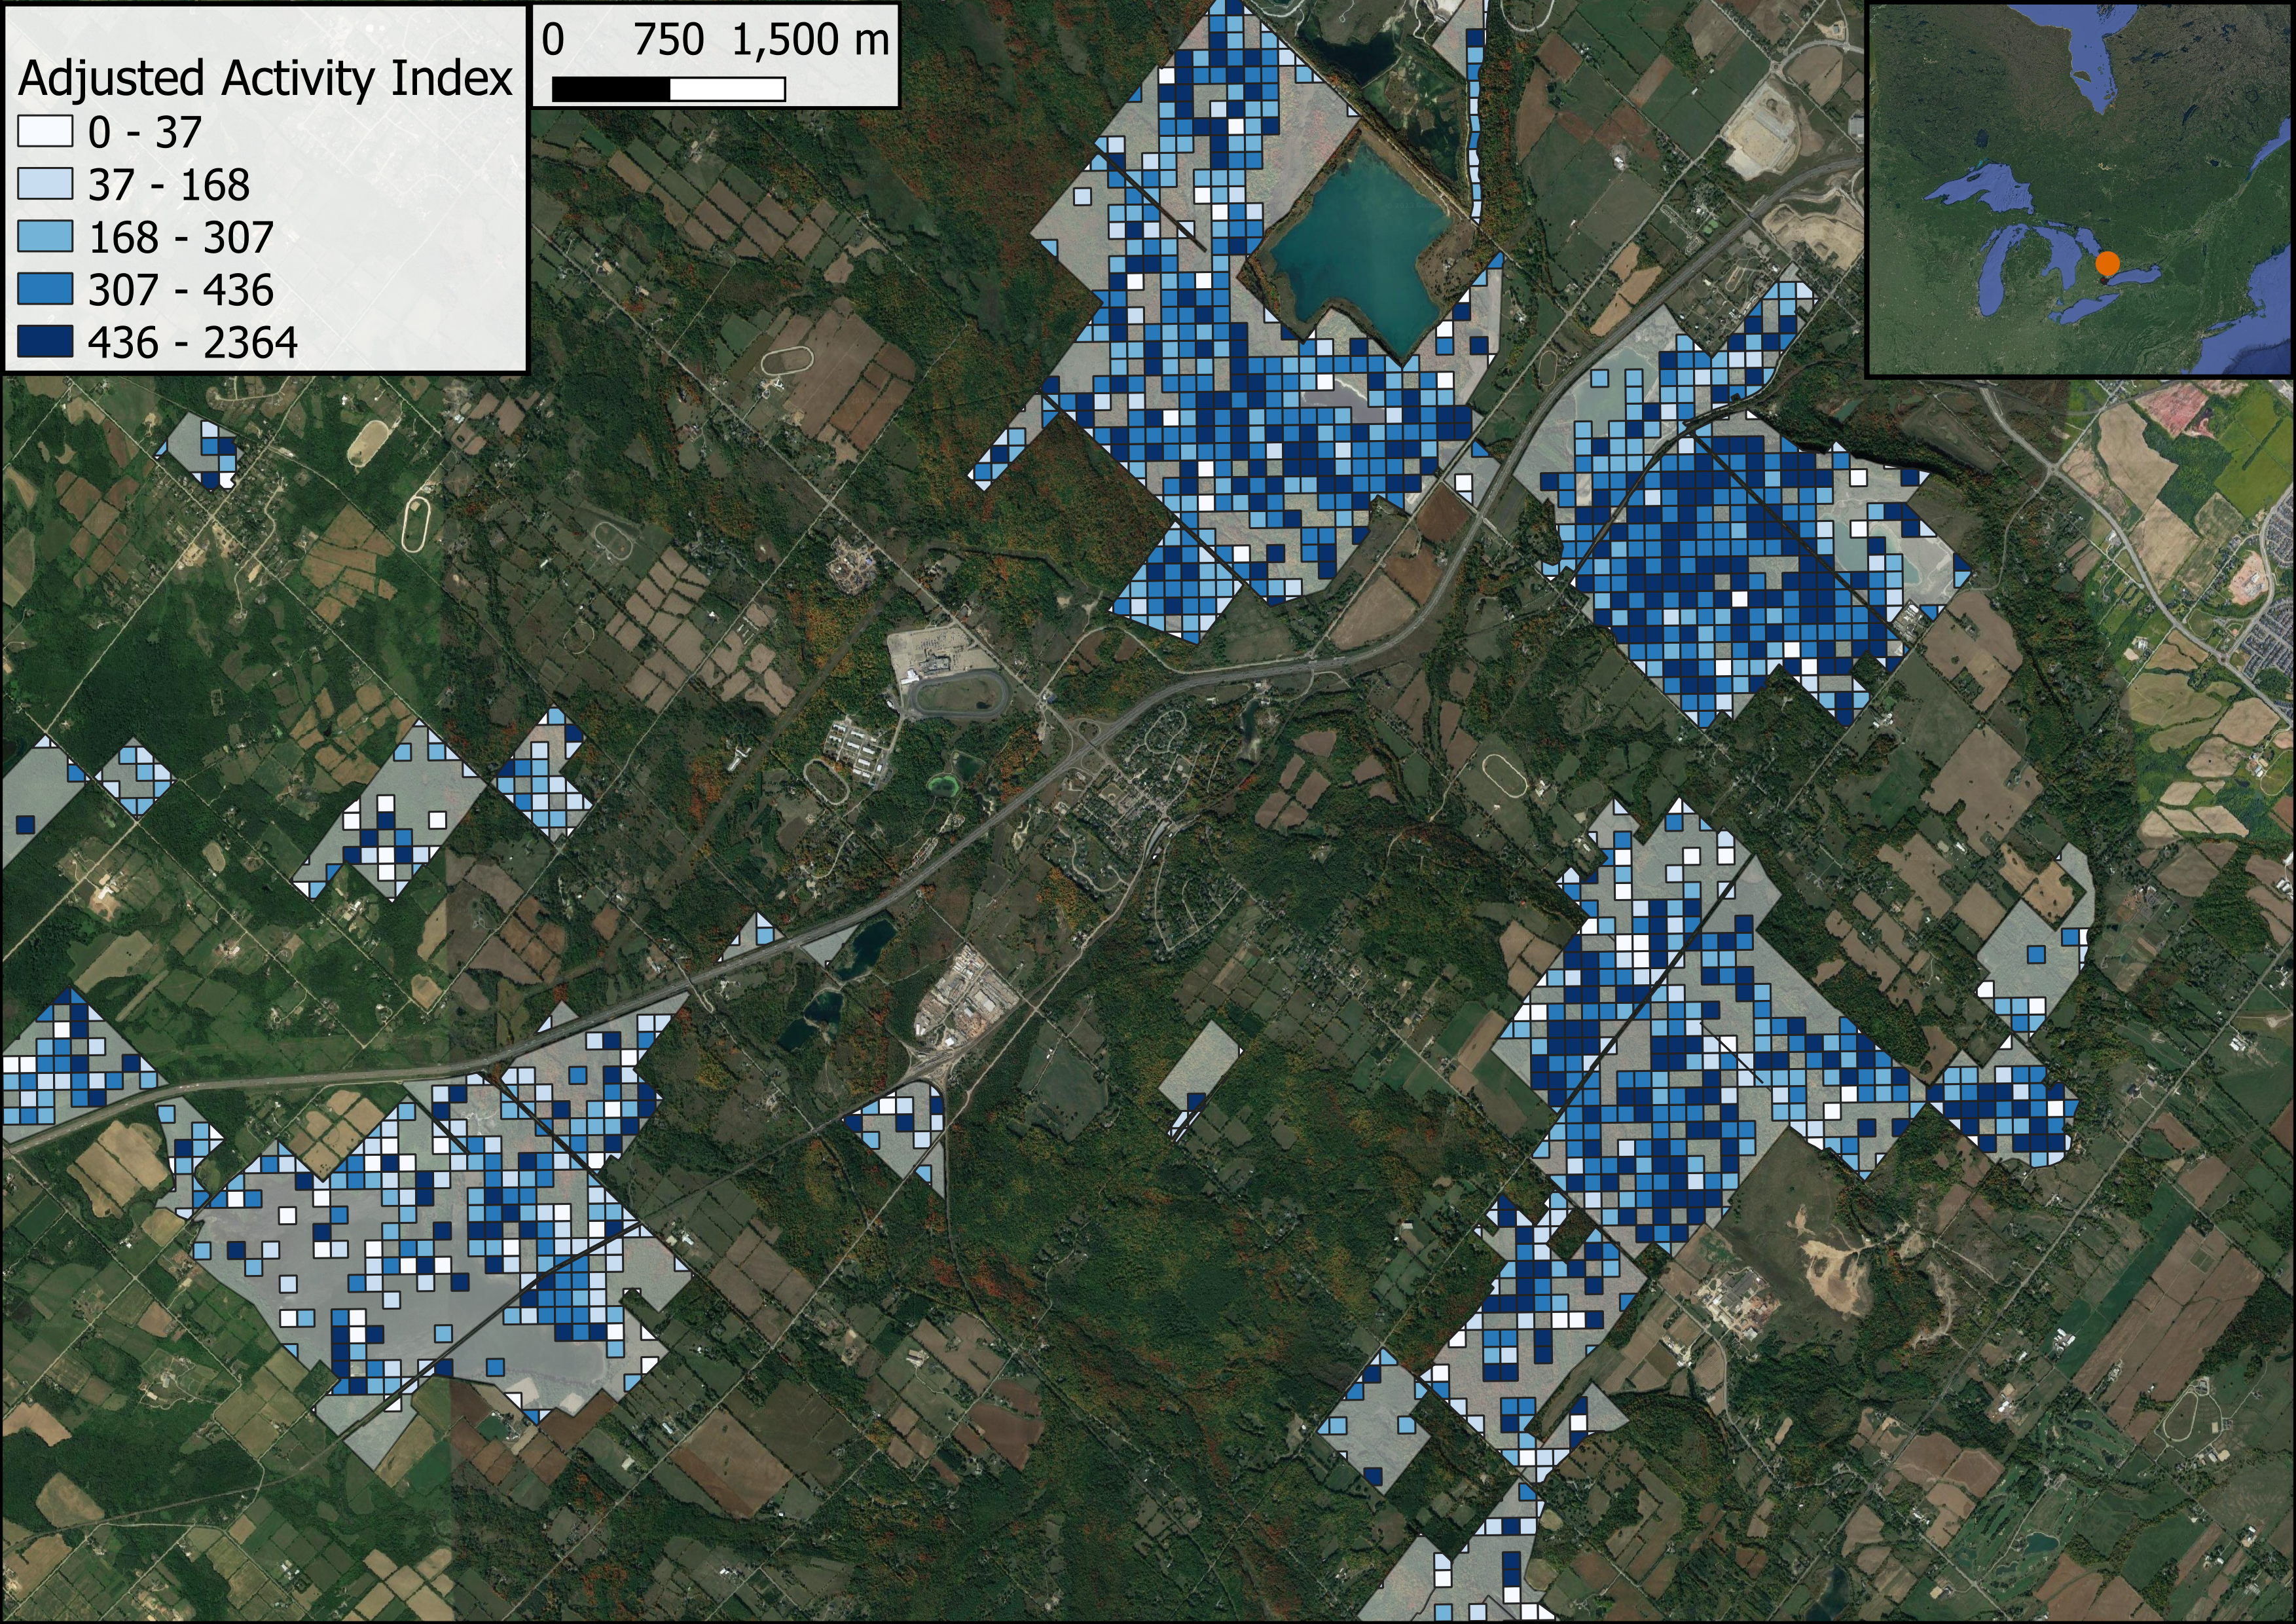 An image of human activity represented by 100 x 100 m grid cells in Halton Region, Canada. The figure demonstrates areas of high and low activity patterns in properties owned and managed by Conservation Halton.